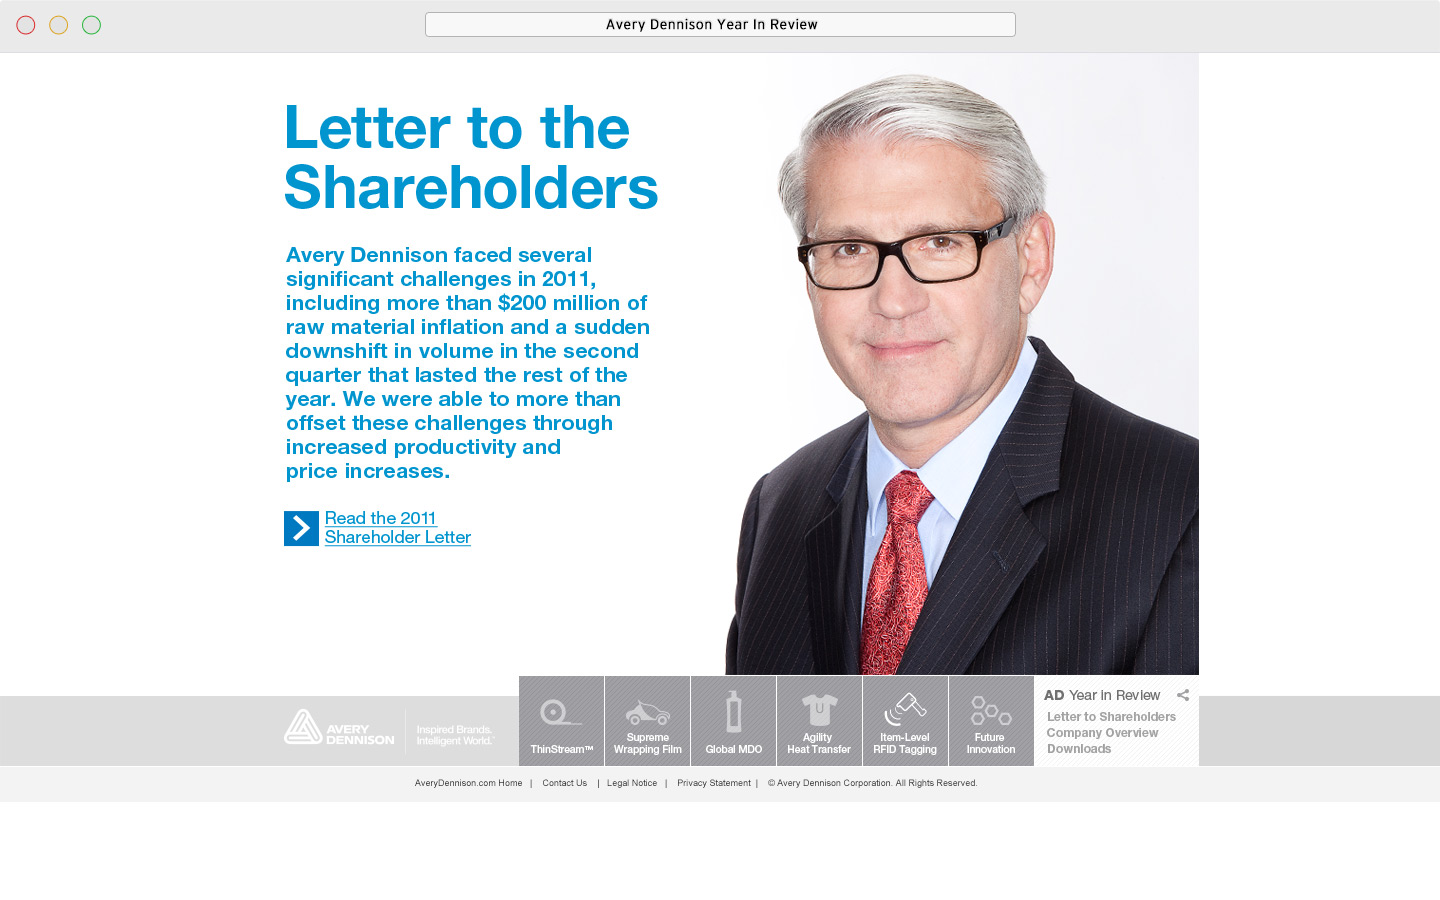 Avery Dennison 2011 Online Year In Review Letter to Shareholders with CEO photo